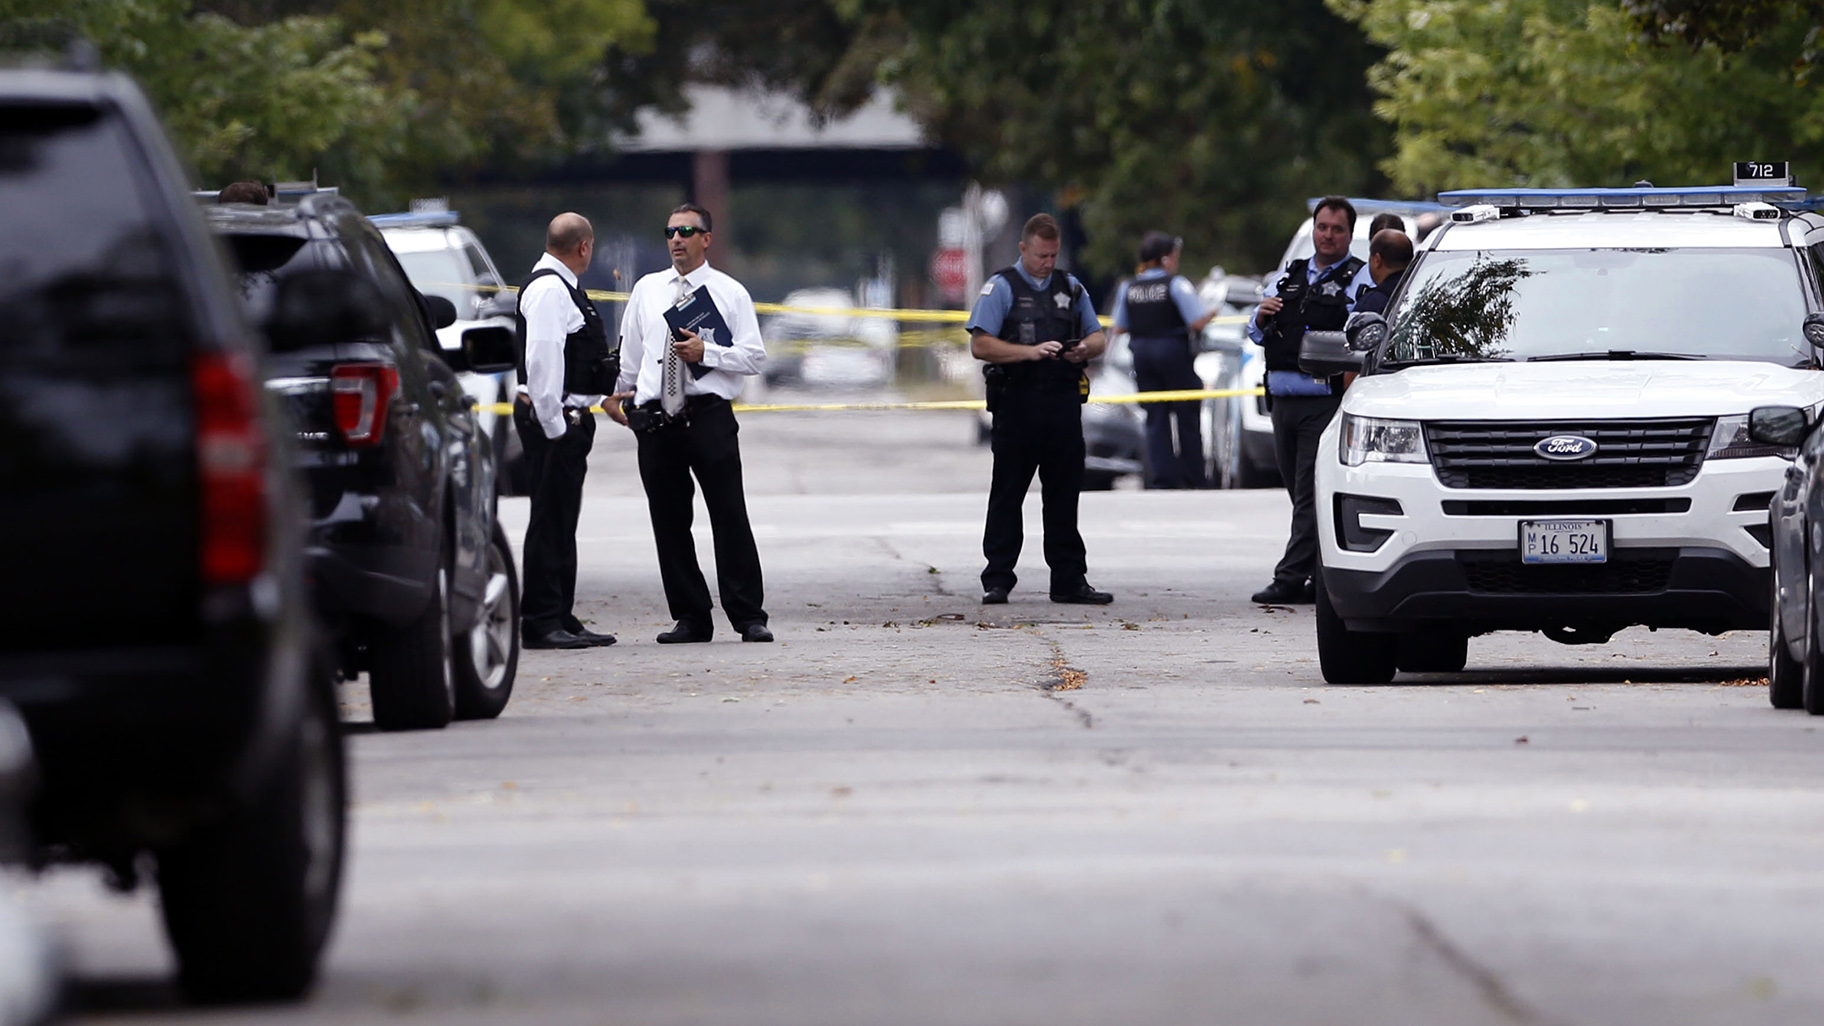 A police officer was shot while serving a warrant on Chicago’s South Side on Saturday, Sept. 21, 2019. The man suspected of shooting the officer and of being the cyclist who shot a woman in broad daylight near downtown days earlier has been captured, police said. (Kevin Tanaka / Chicago Sun-Times via AP)